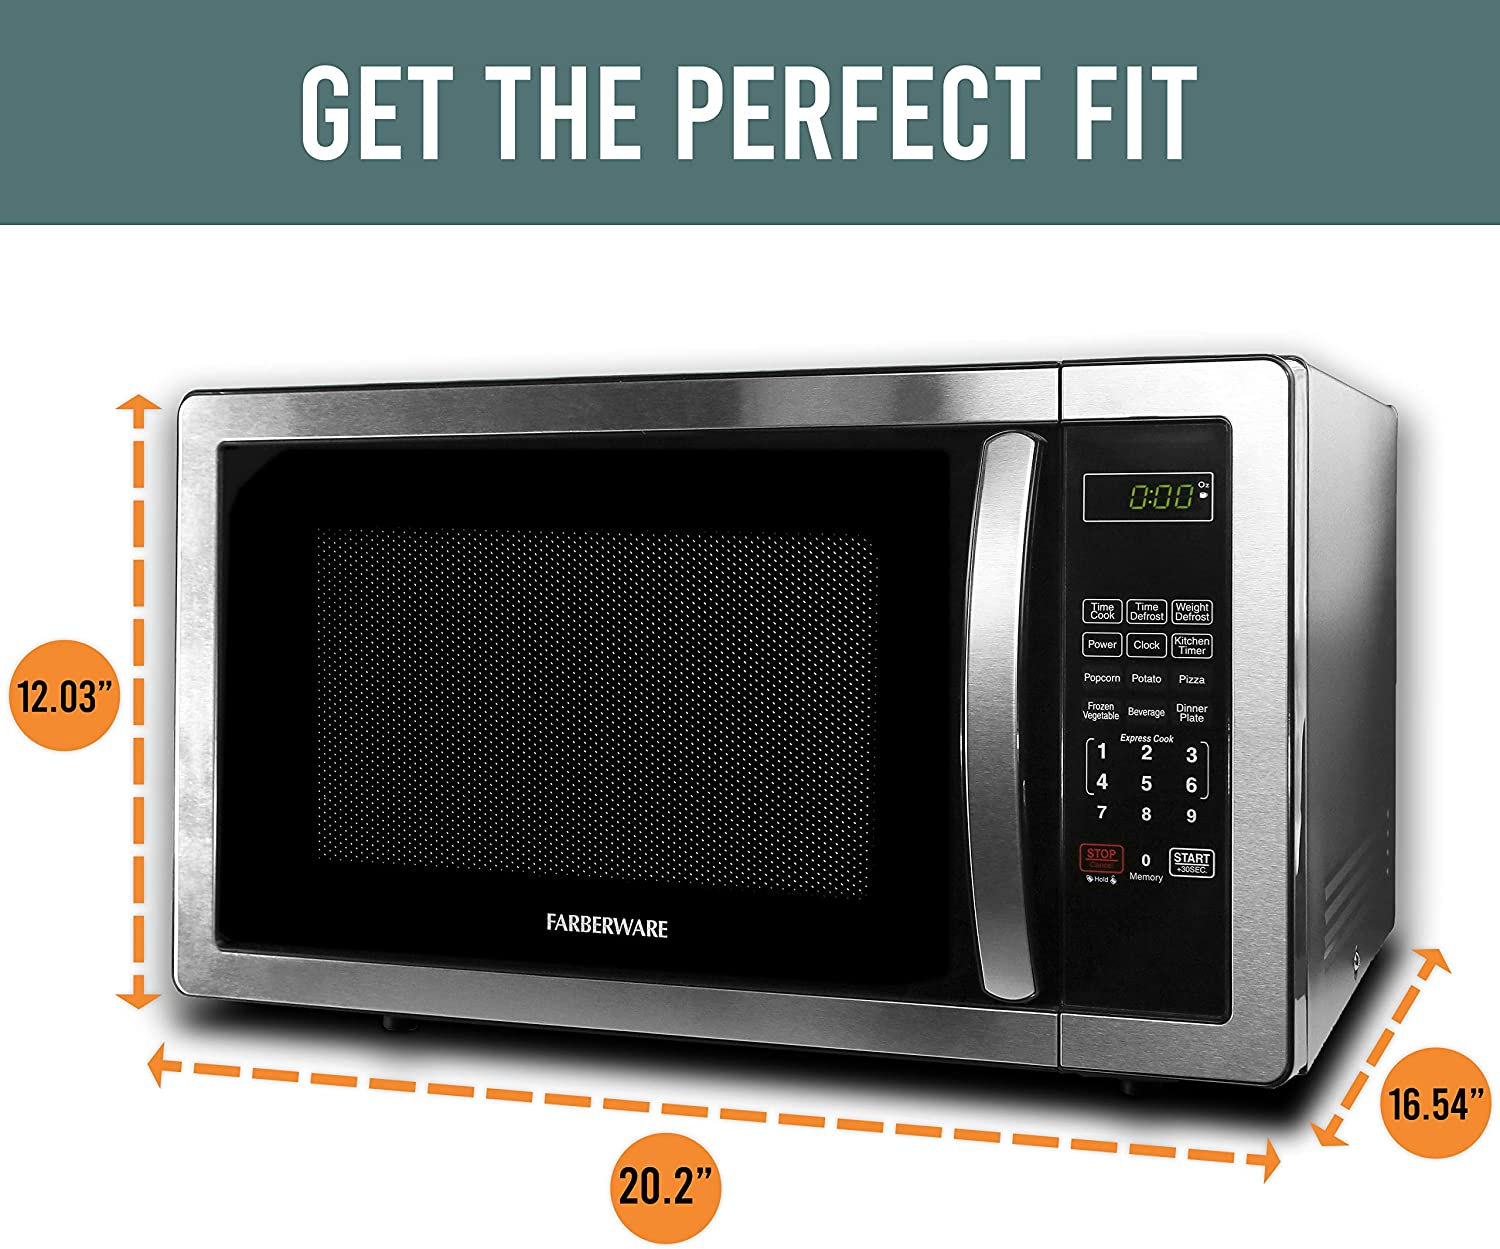 Farberware 1.1 Cu. Ft. Stainless Steel Countertop Microwave Oven With 6 Cooking Programs, LED Lighting, 1000 Watts - image 3 of 10